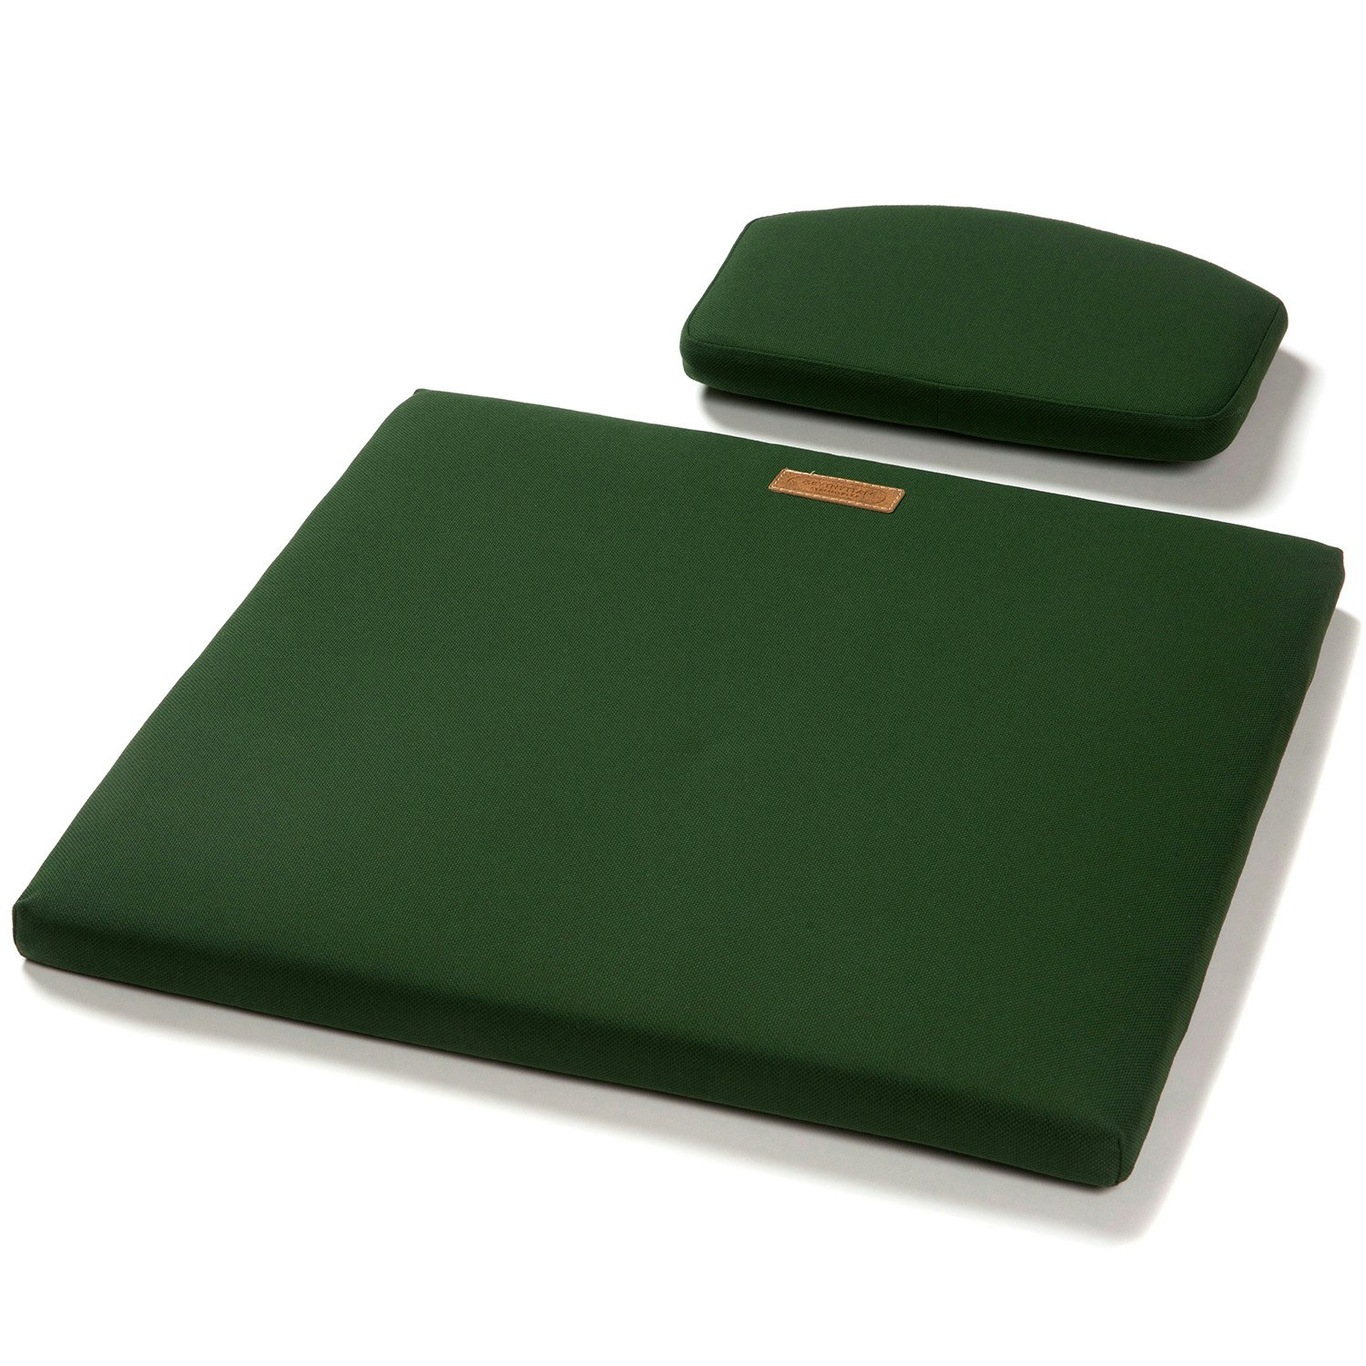 A3 Seat Cushion For Lounge Chair, Green